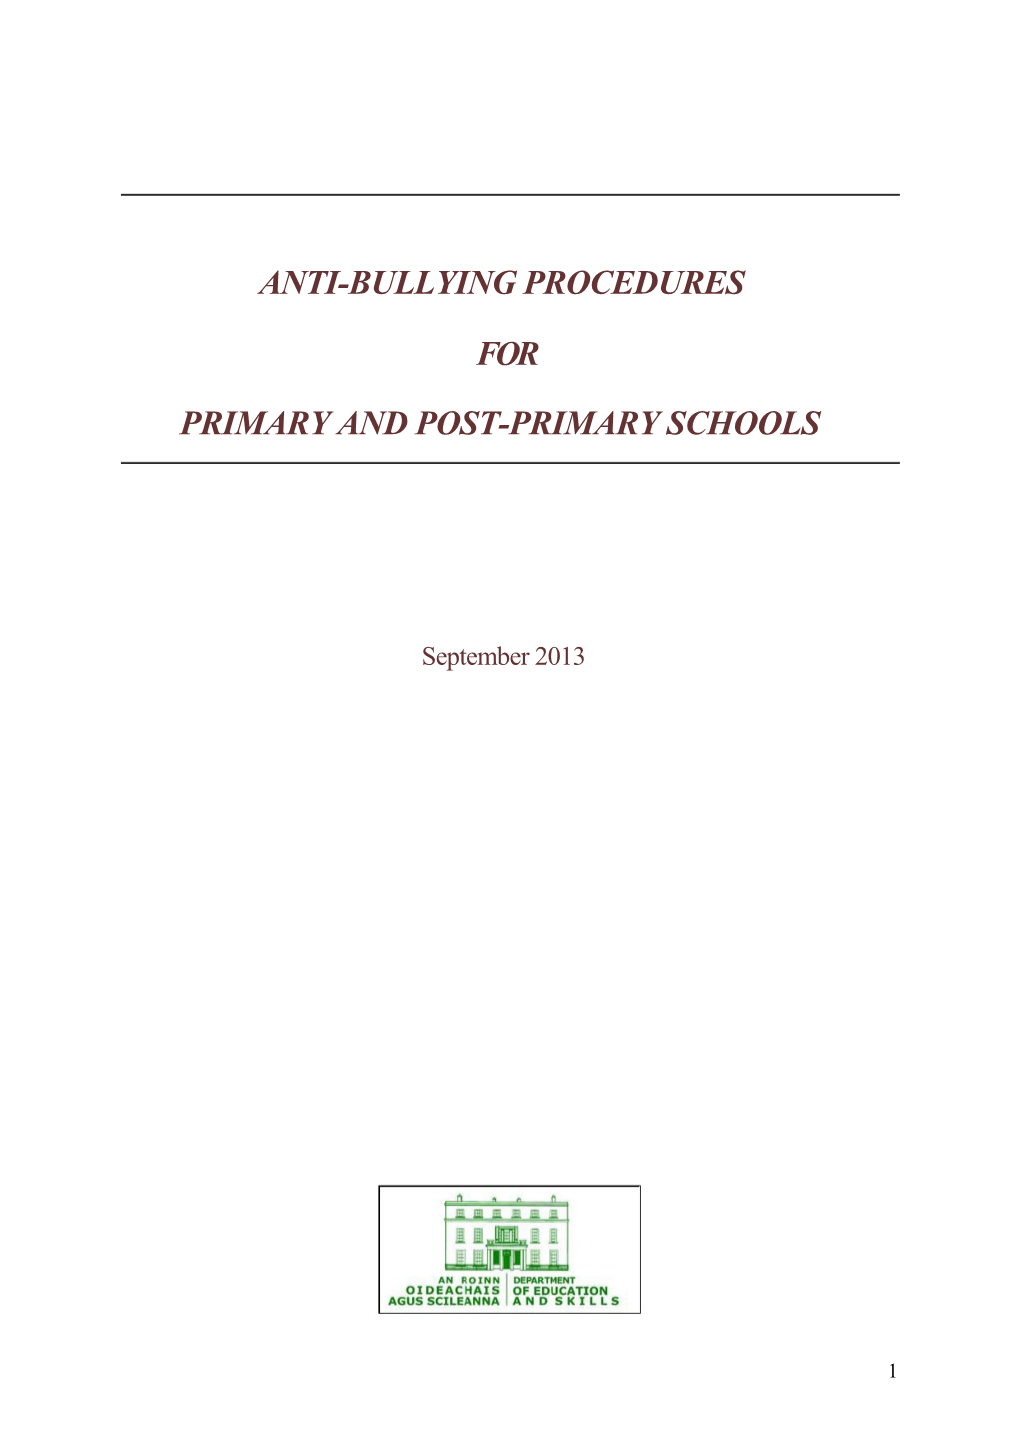 Primary and Post-Primary Schools